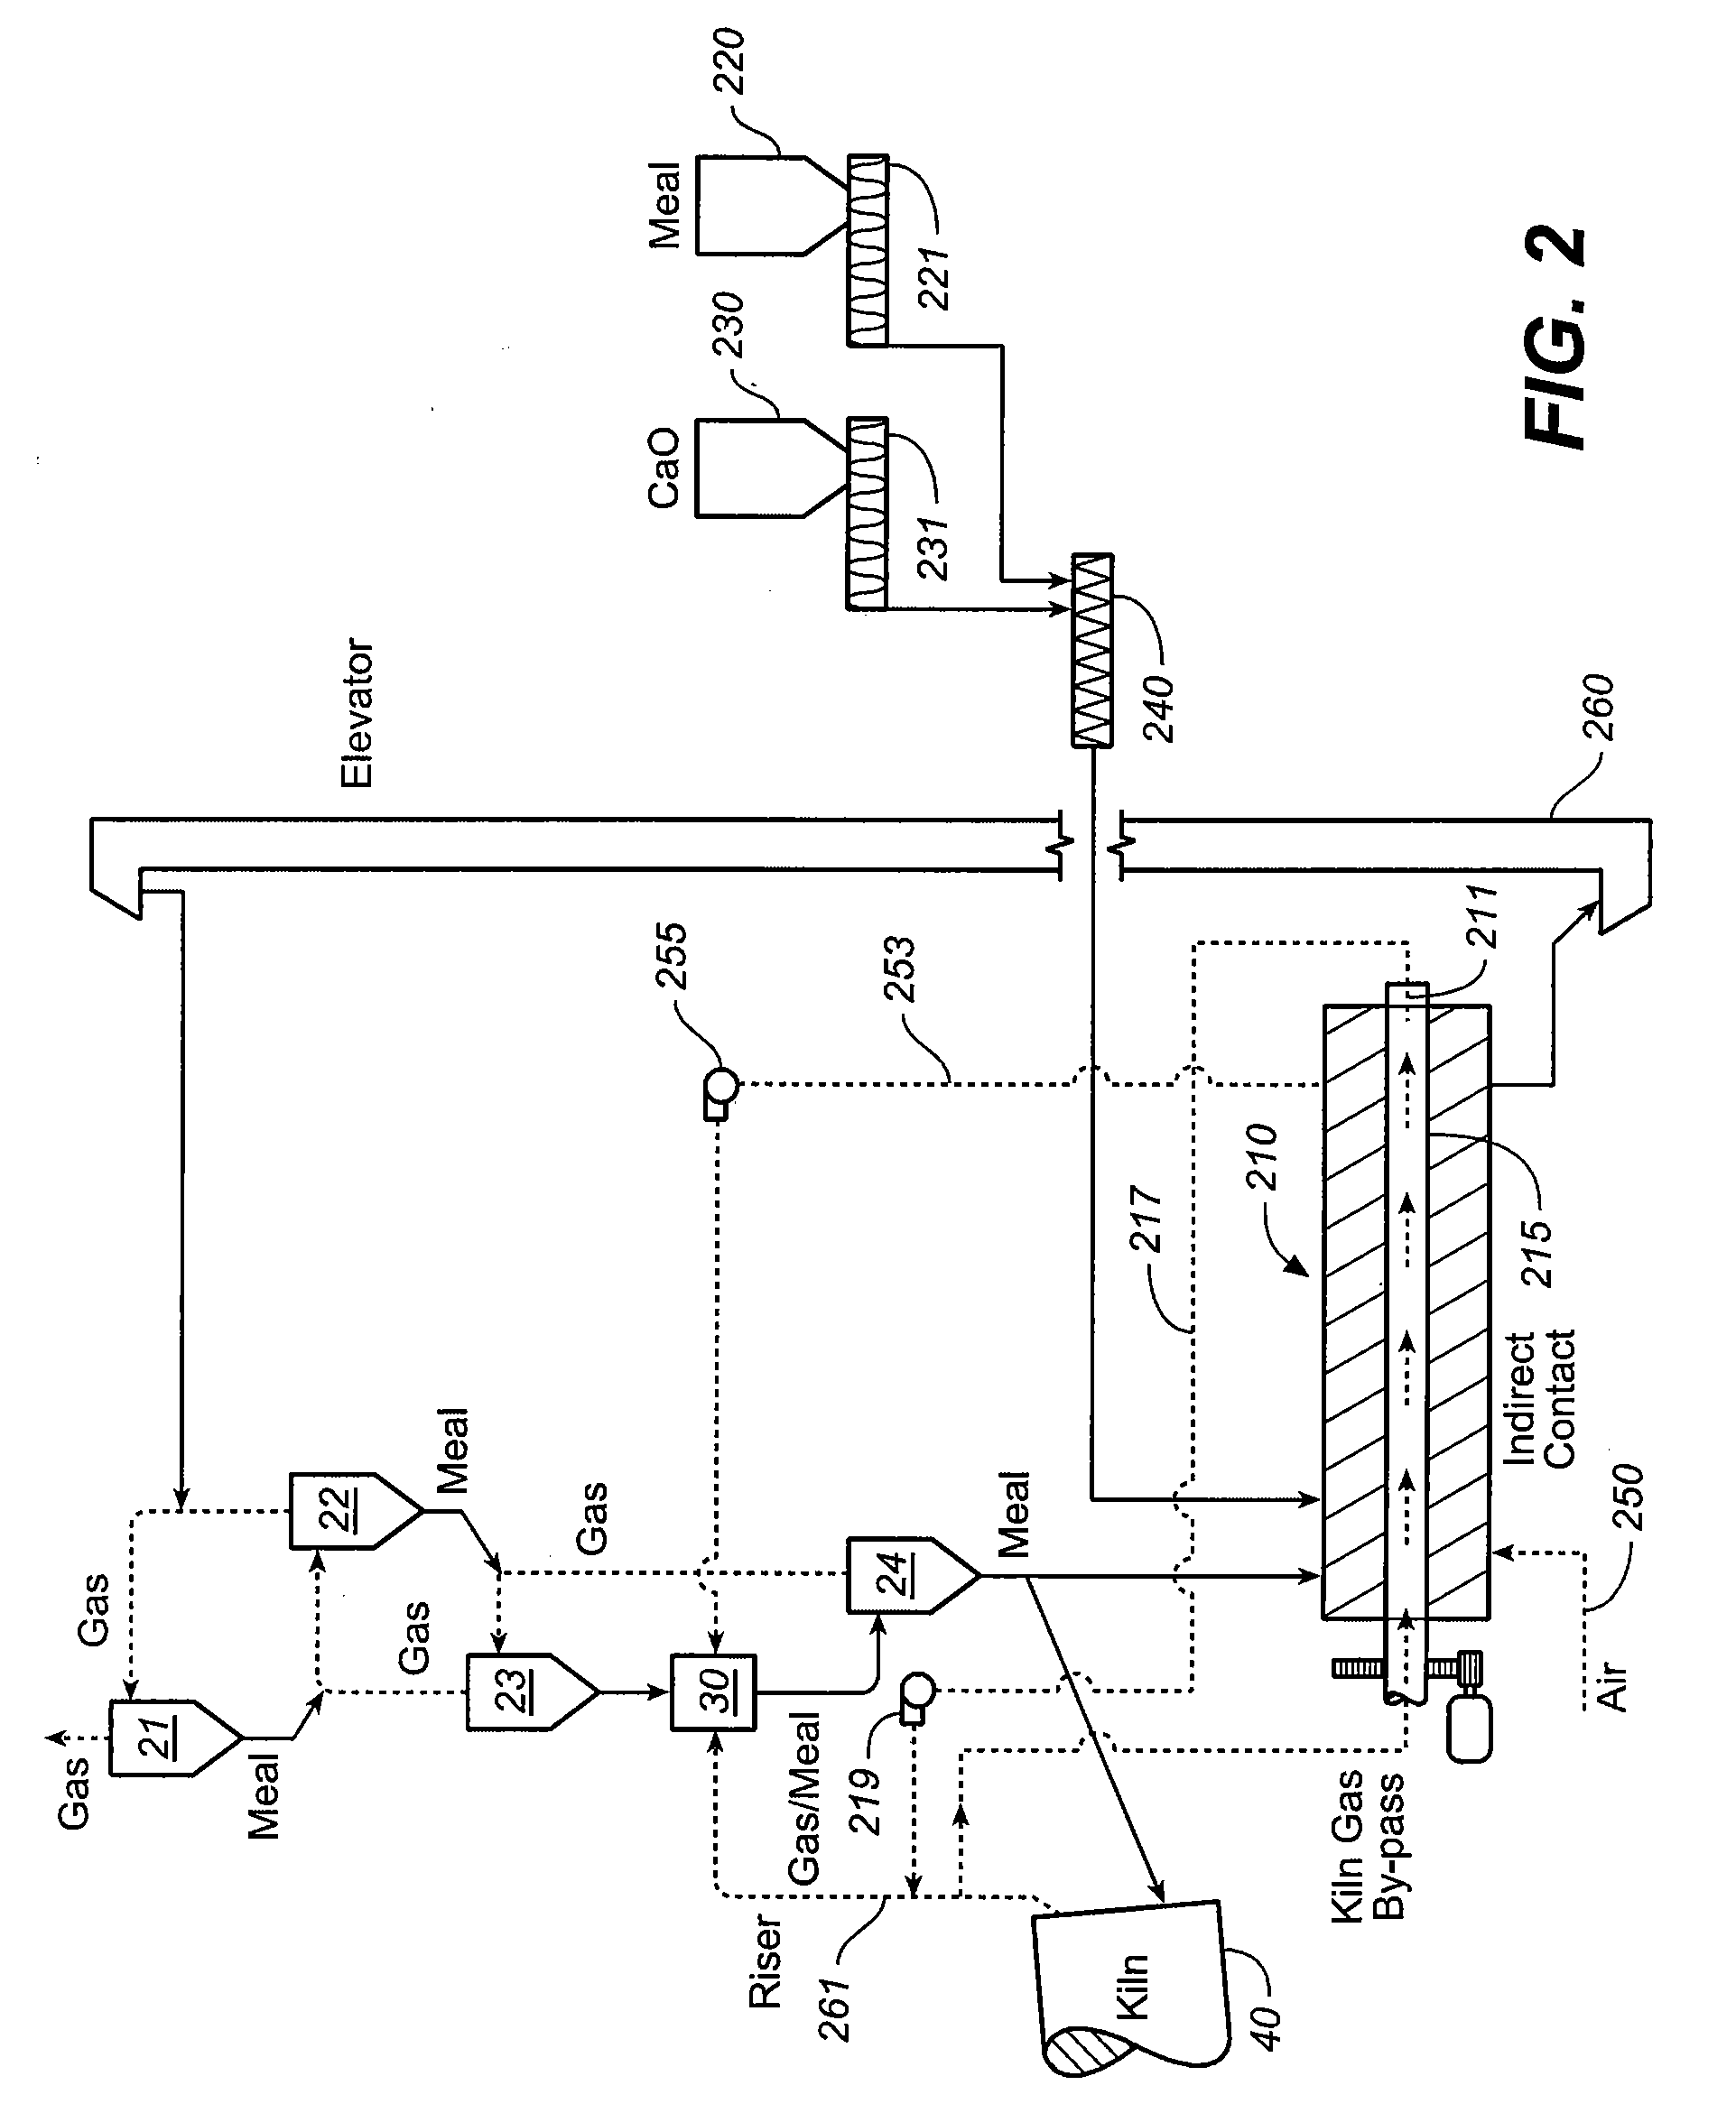 Apparatus and method for controlling mercury pollution from a cement plant